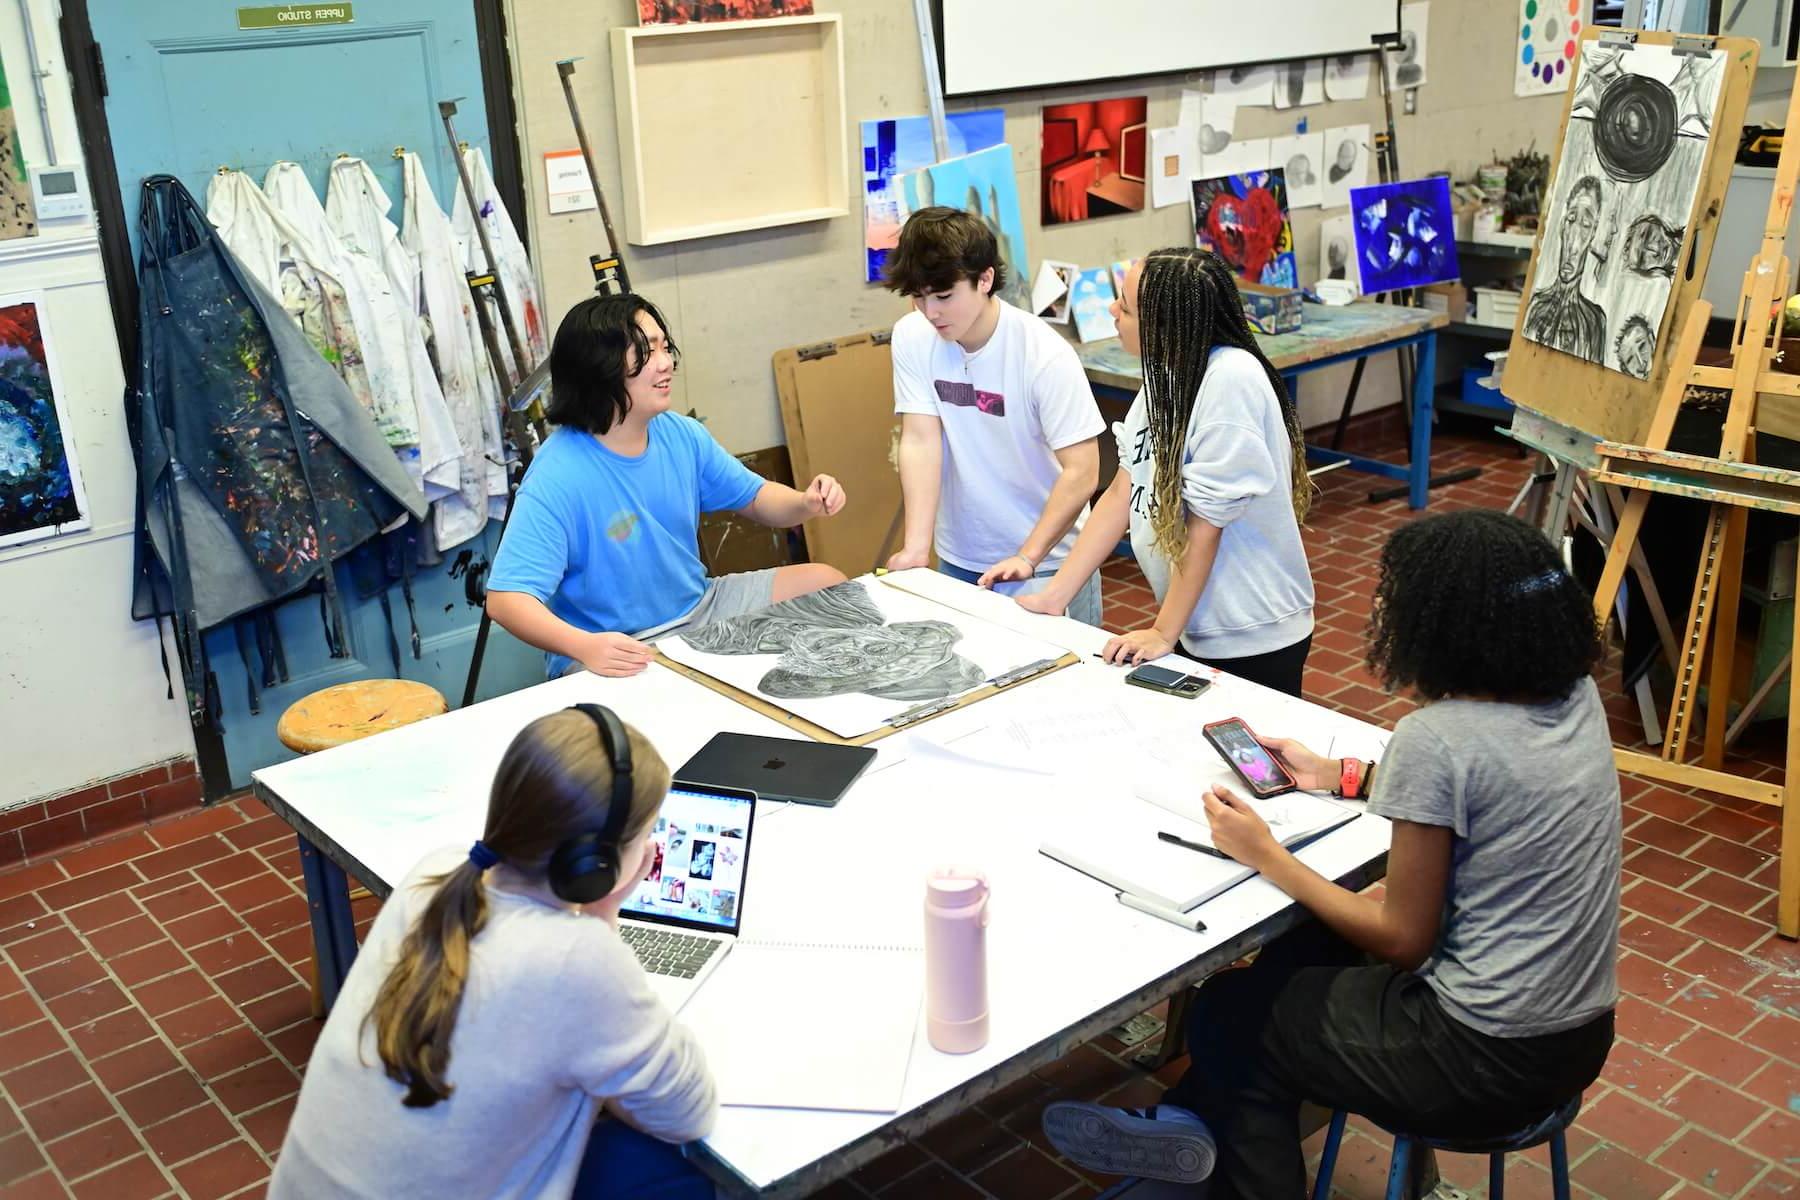 Ethical Culture Fieldston School students working together during visual art class